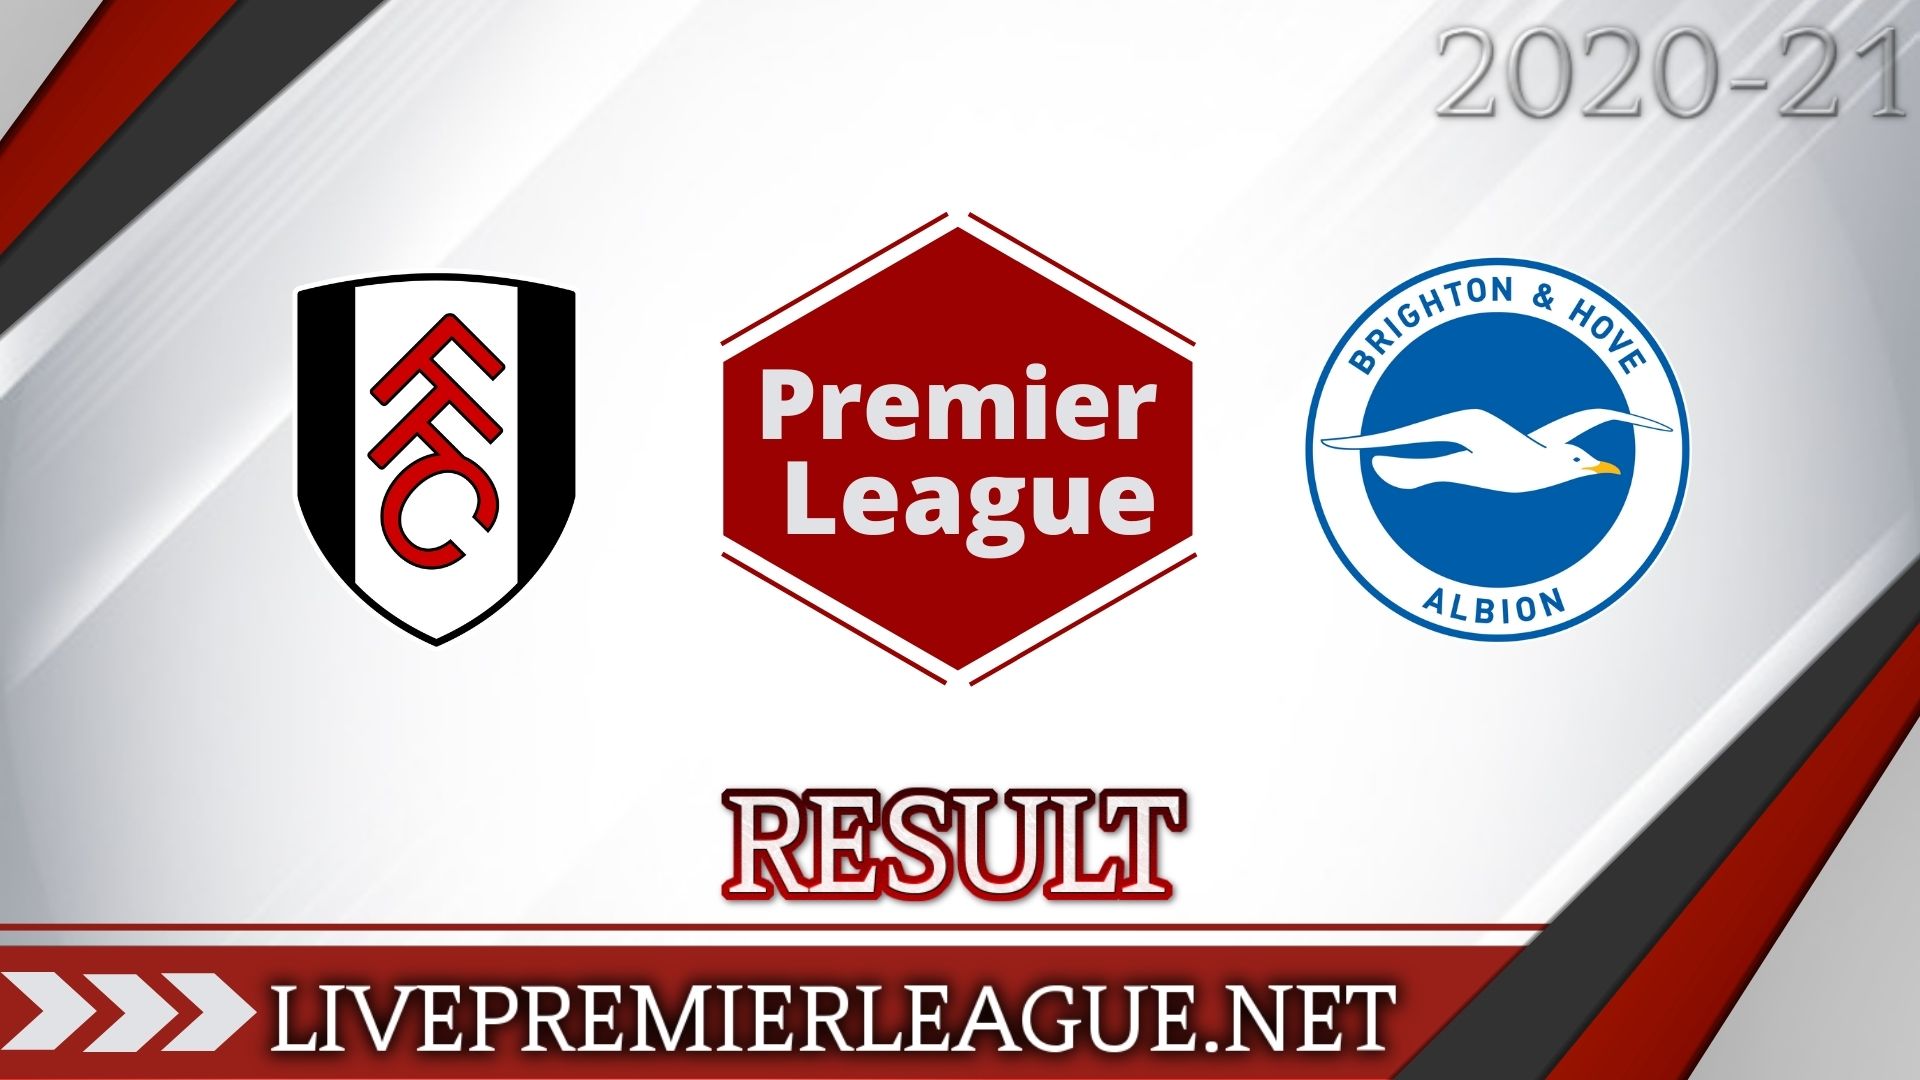 Fulham Vs Brighton and Hove Albion | Week 13 Result 2020